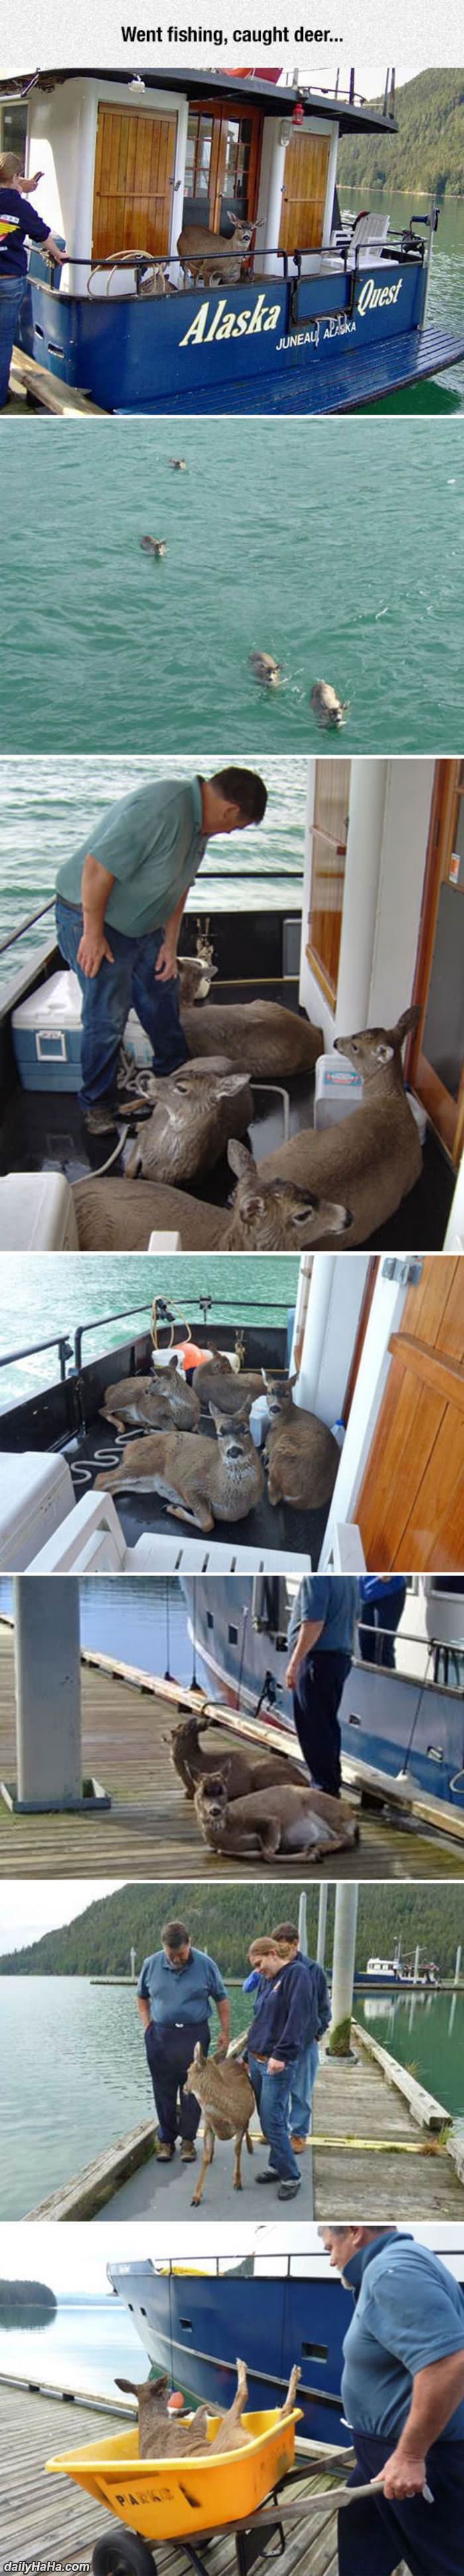 went fishing caught deer funny picture